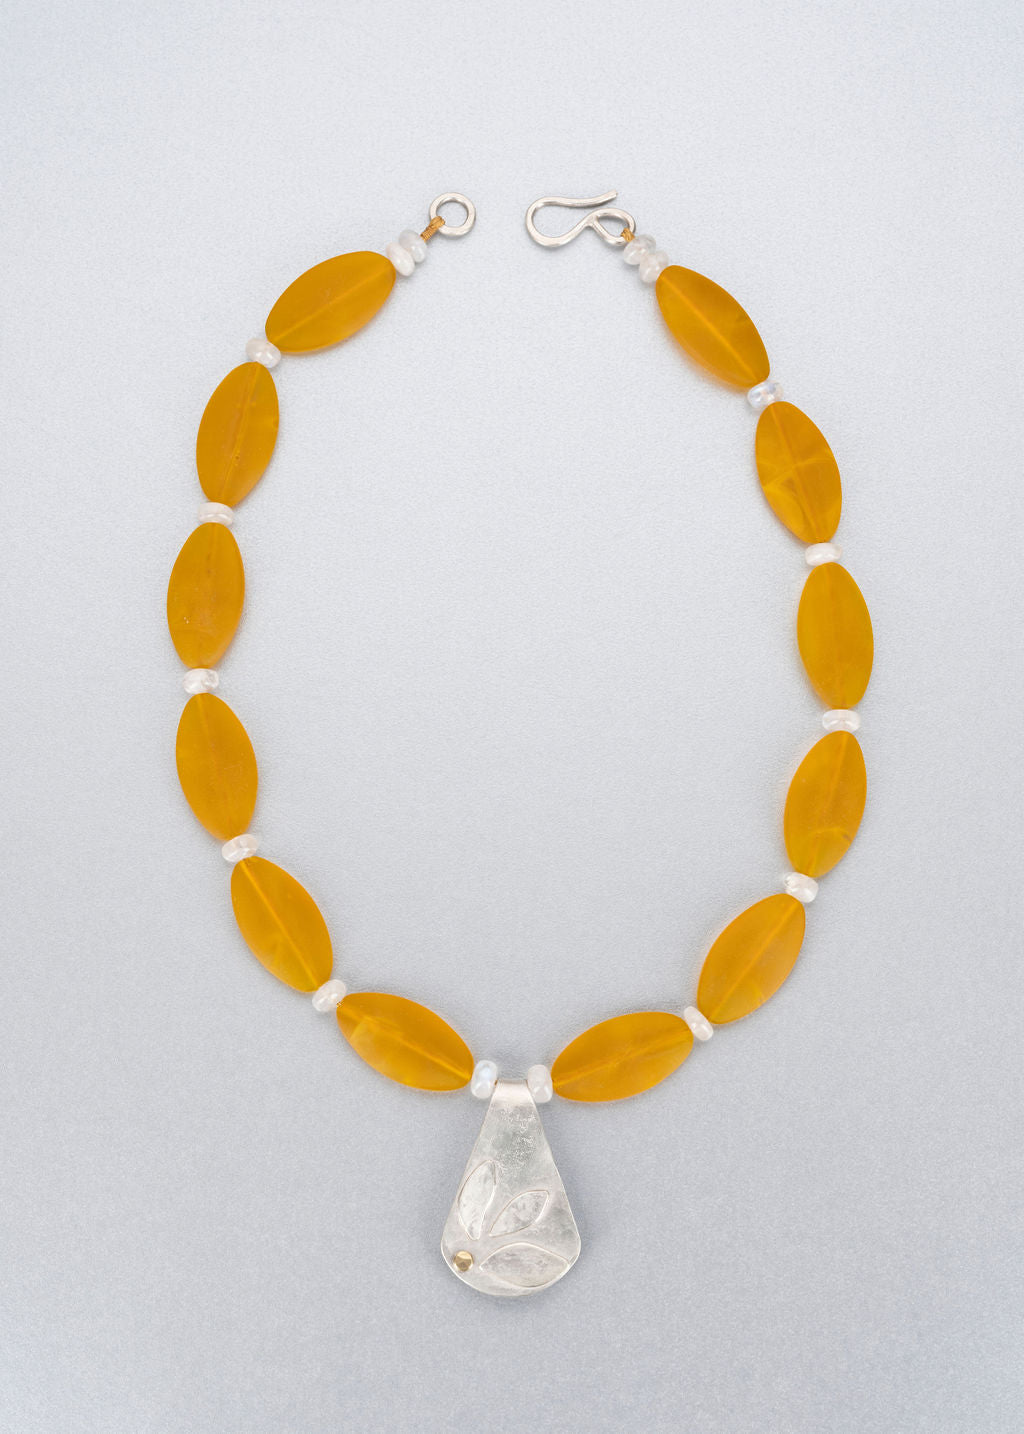 Sea glass, moonstone, silver and 18 ct gold necklace